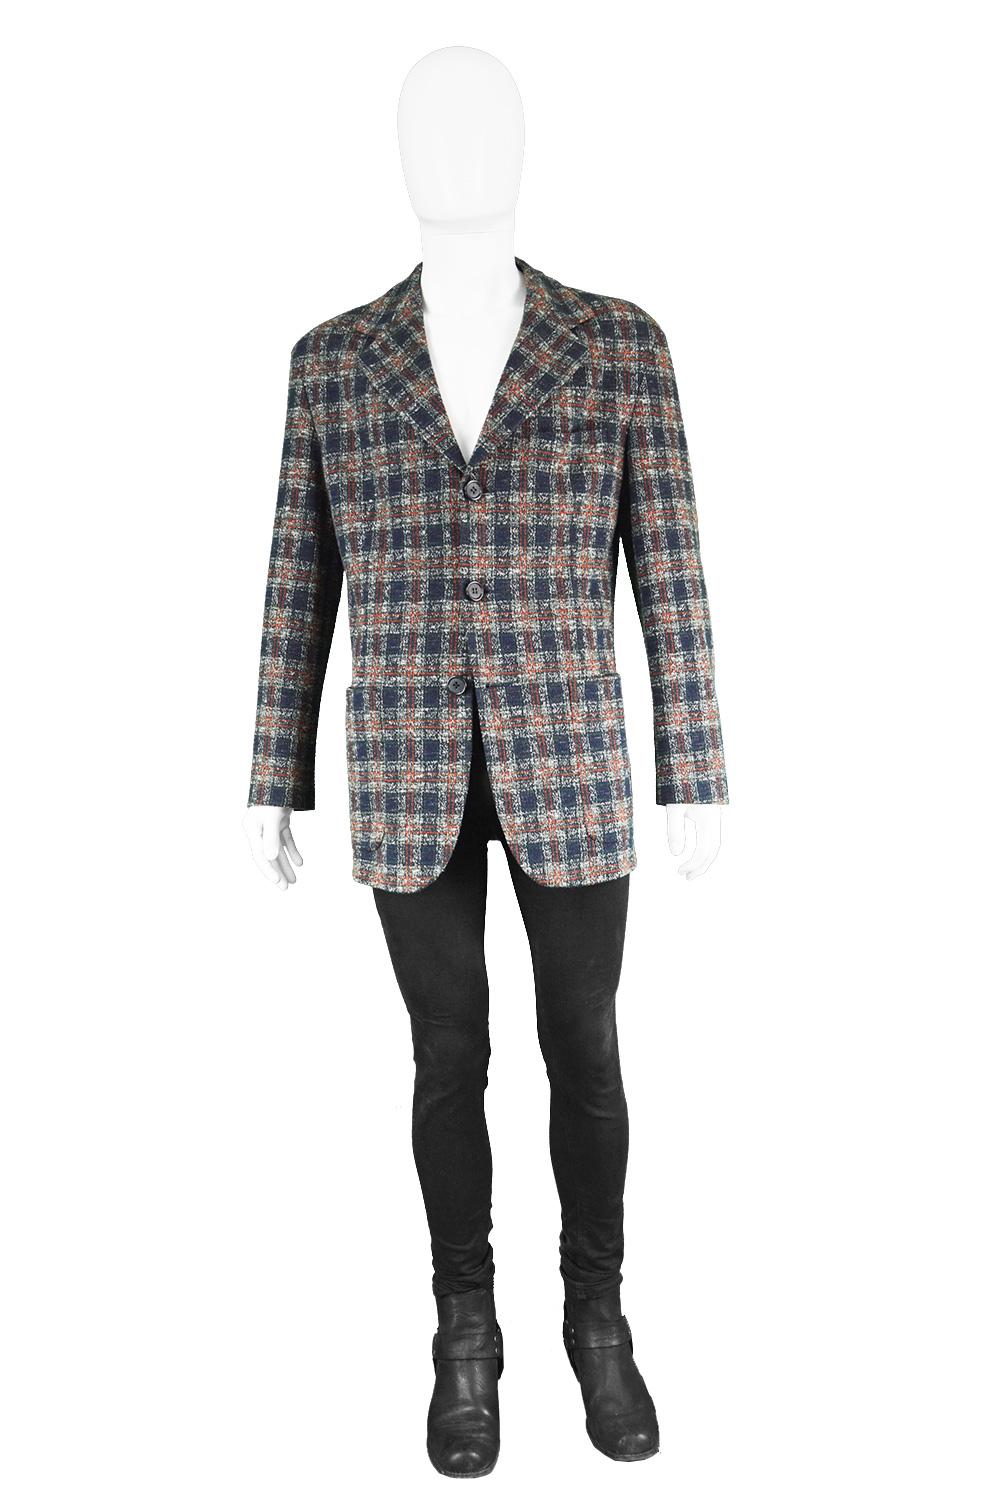 Dolce & Gabbana Vintage Men's Italian Wool & Cotton Plaid Blazer Jacket, 1990s

Size: Marked 48 which is roughly a men's Small to Medium. Please check measurements.
Chest - 42” / 106cm (allow a couple of inches room for movement)
Waist - 38” /